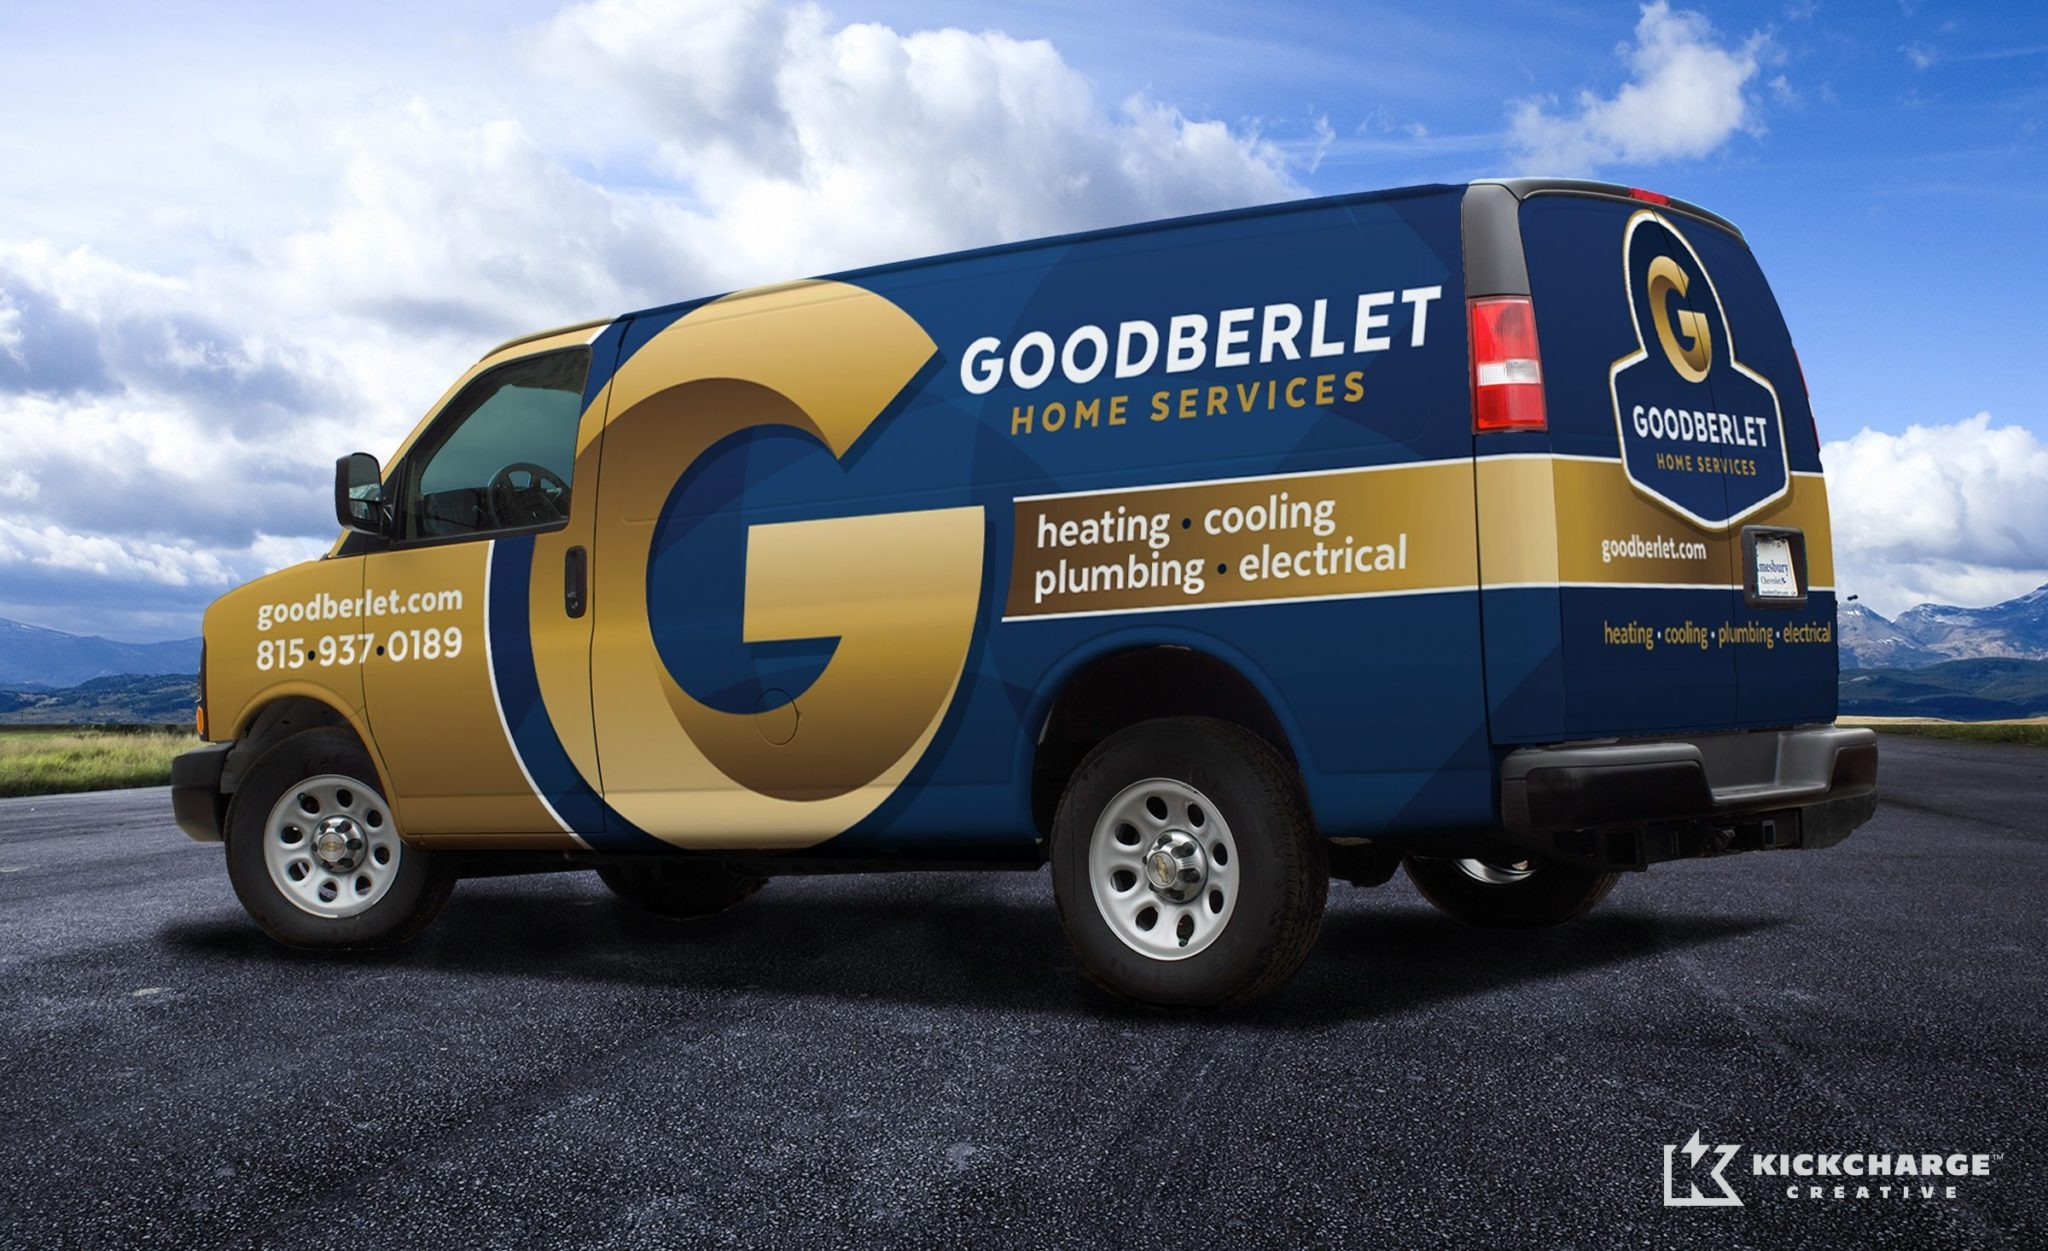 The best vehicle wraps use simple, easy-to-read graphics, as this wrap for Goodberlet Home Services shows.